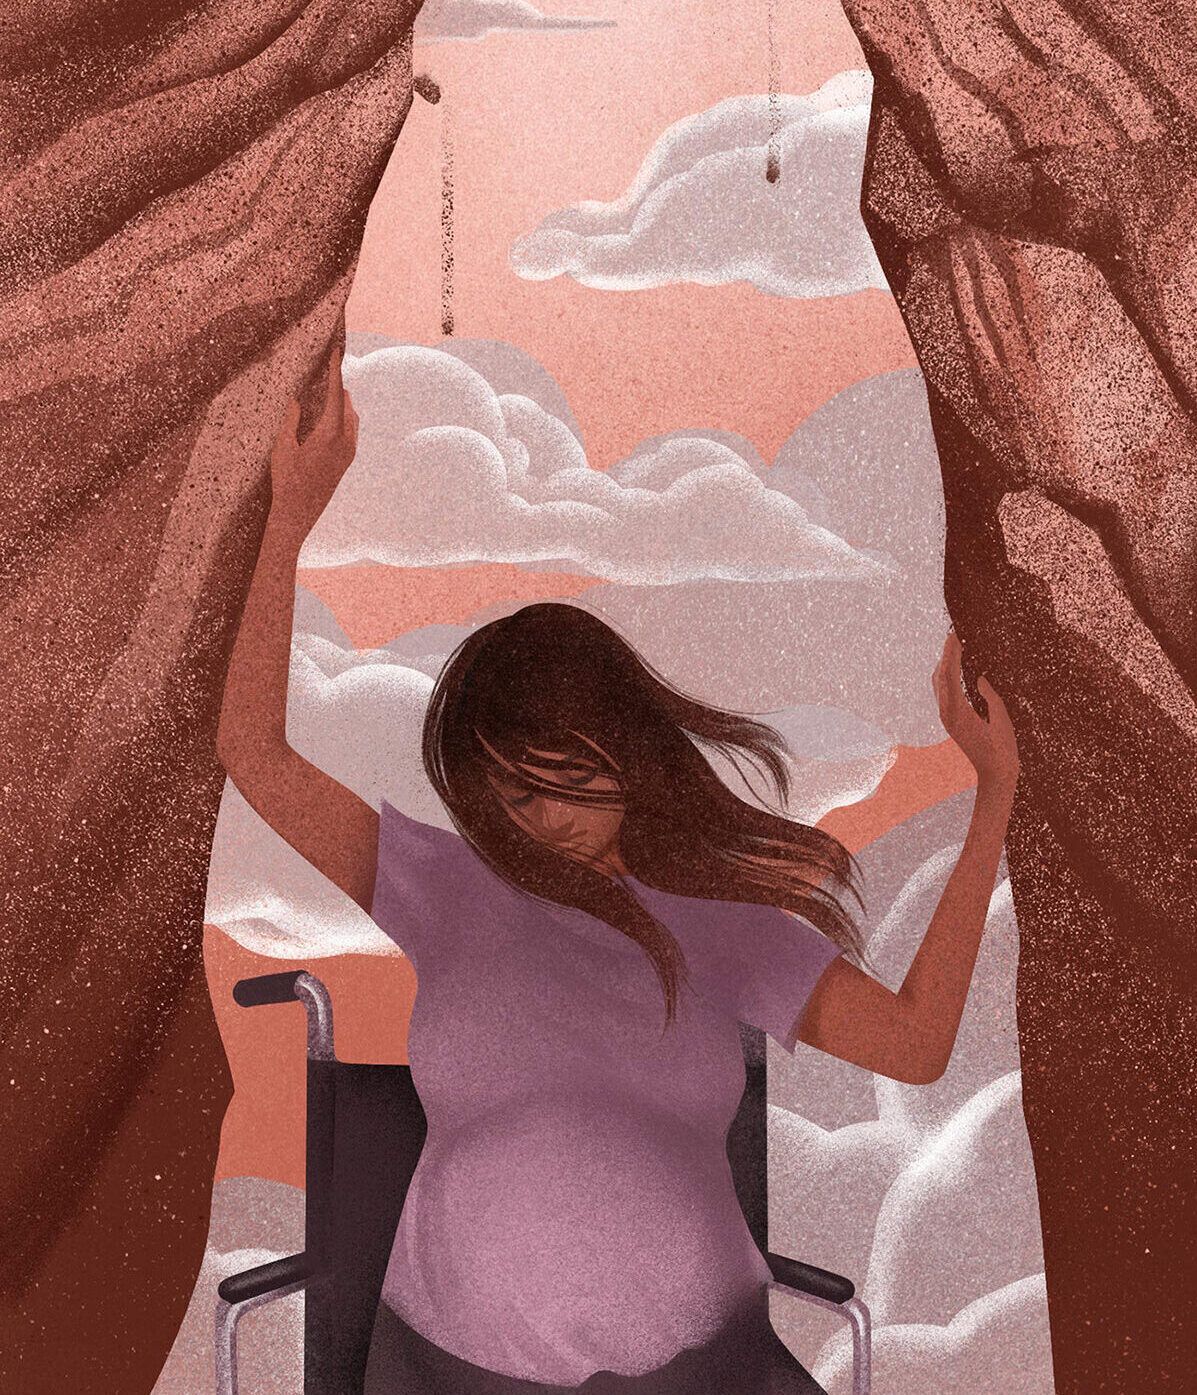 Digital illustration of a pregnant woman in a wheel chair, with her hands grasping the rocky surfaces of cliffs on either side of her.